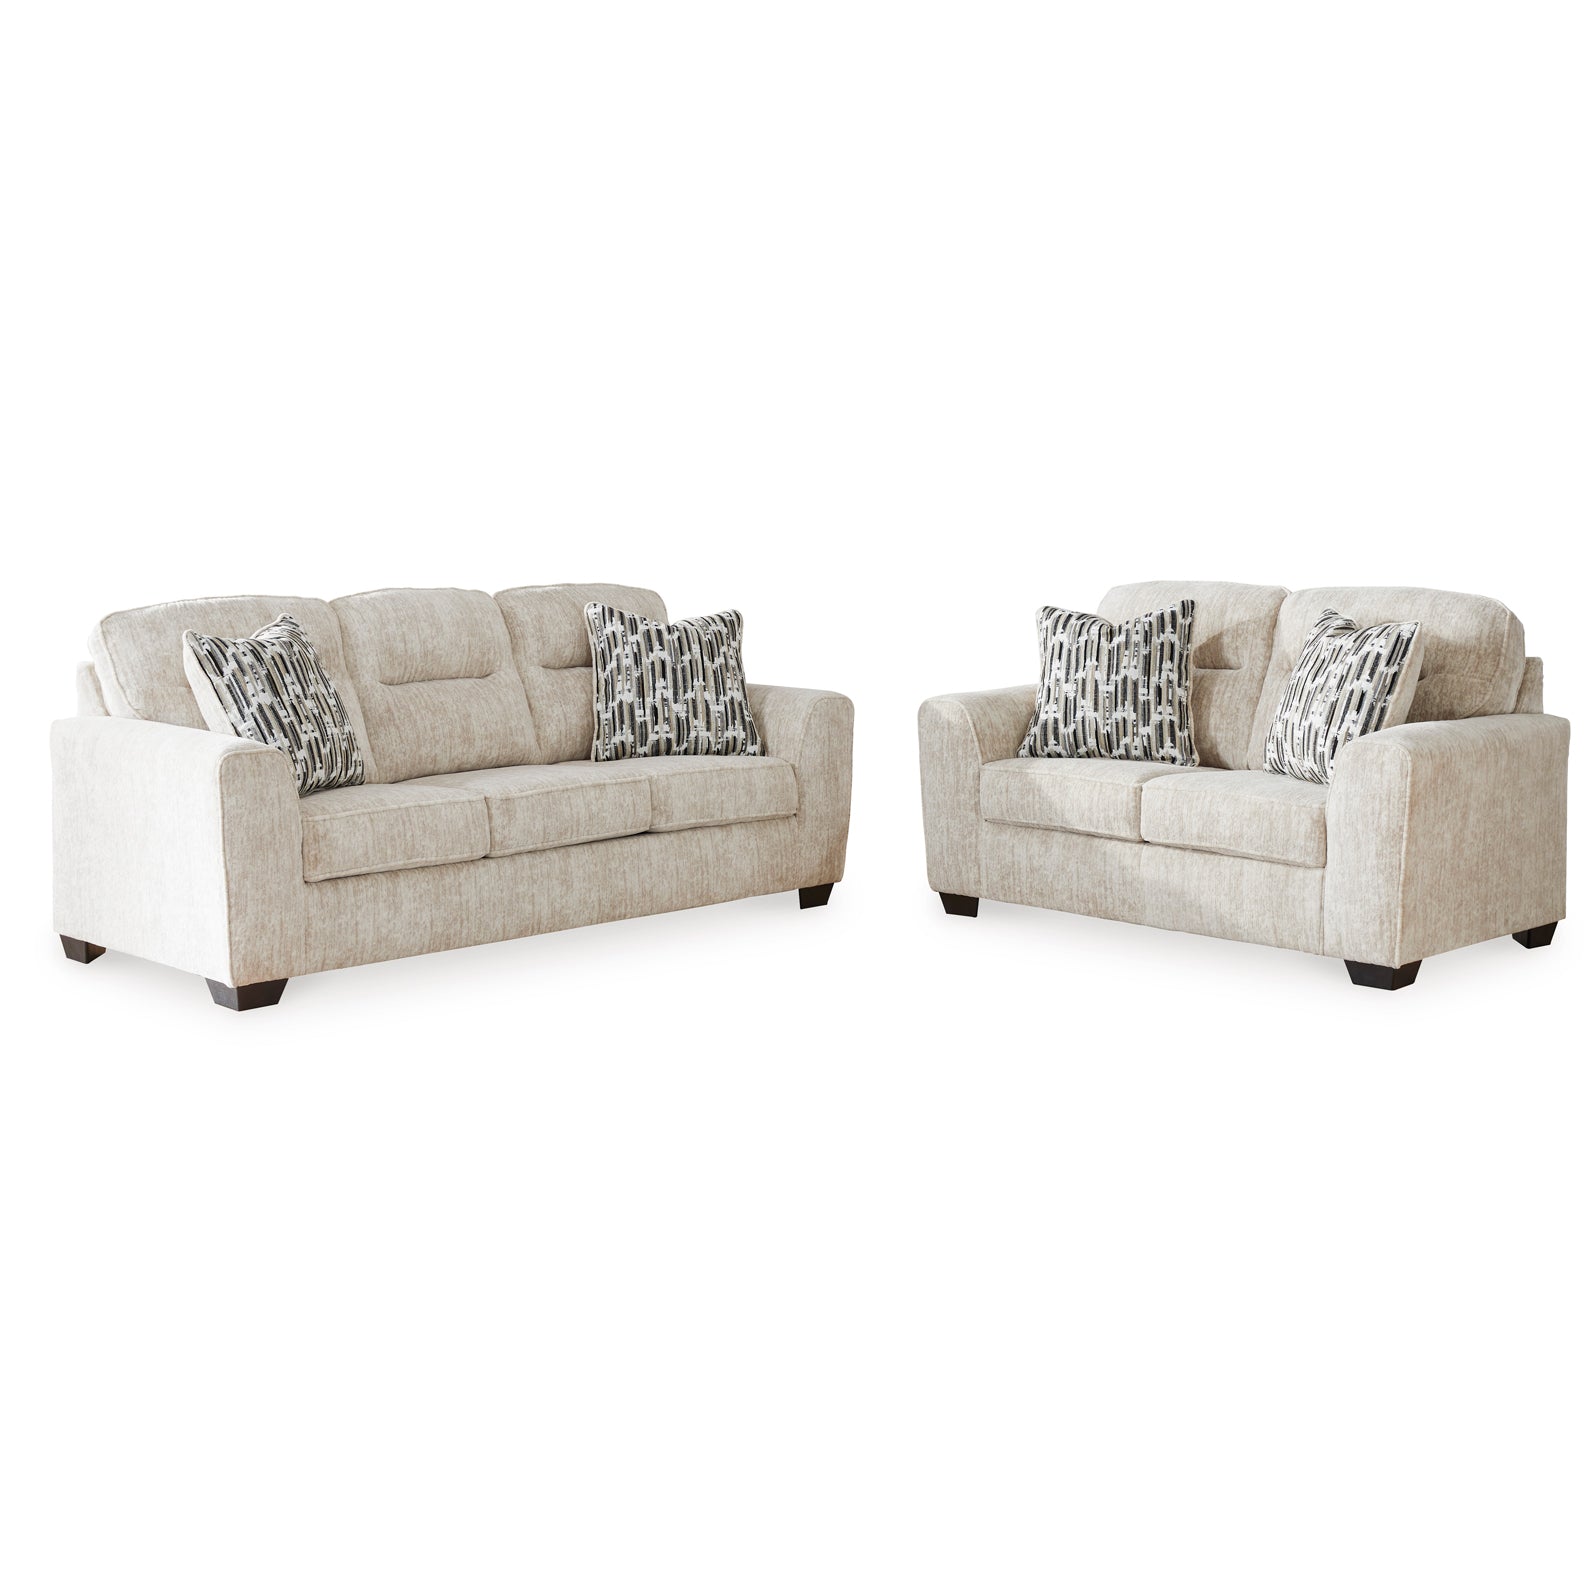 Lonoke Sofa and Loveseat in Parchment Color